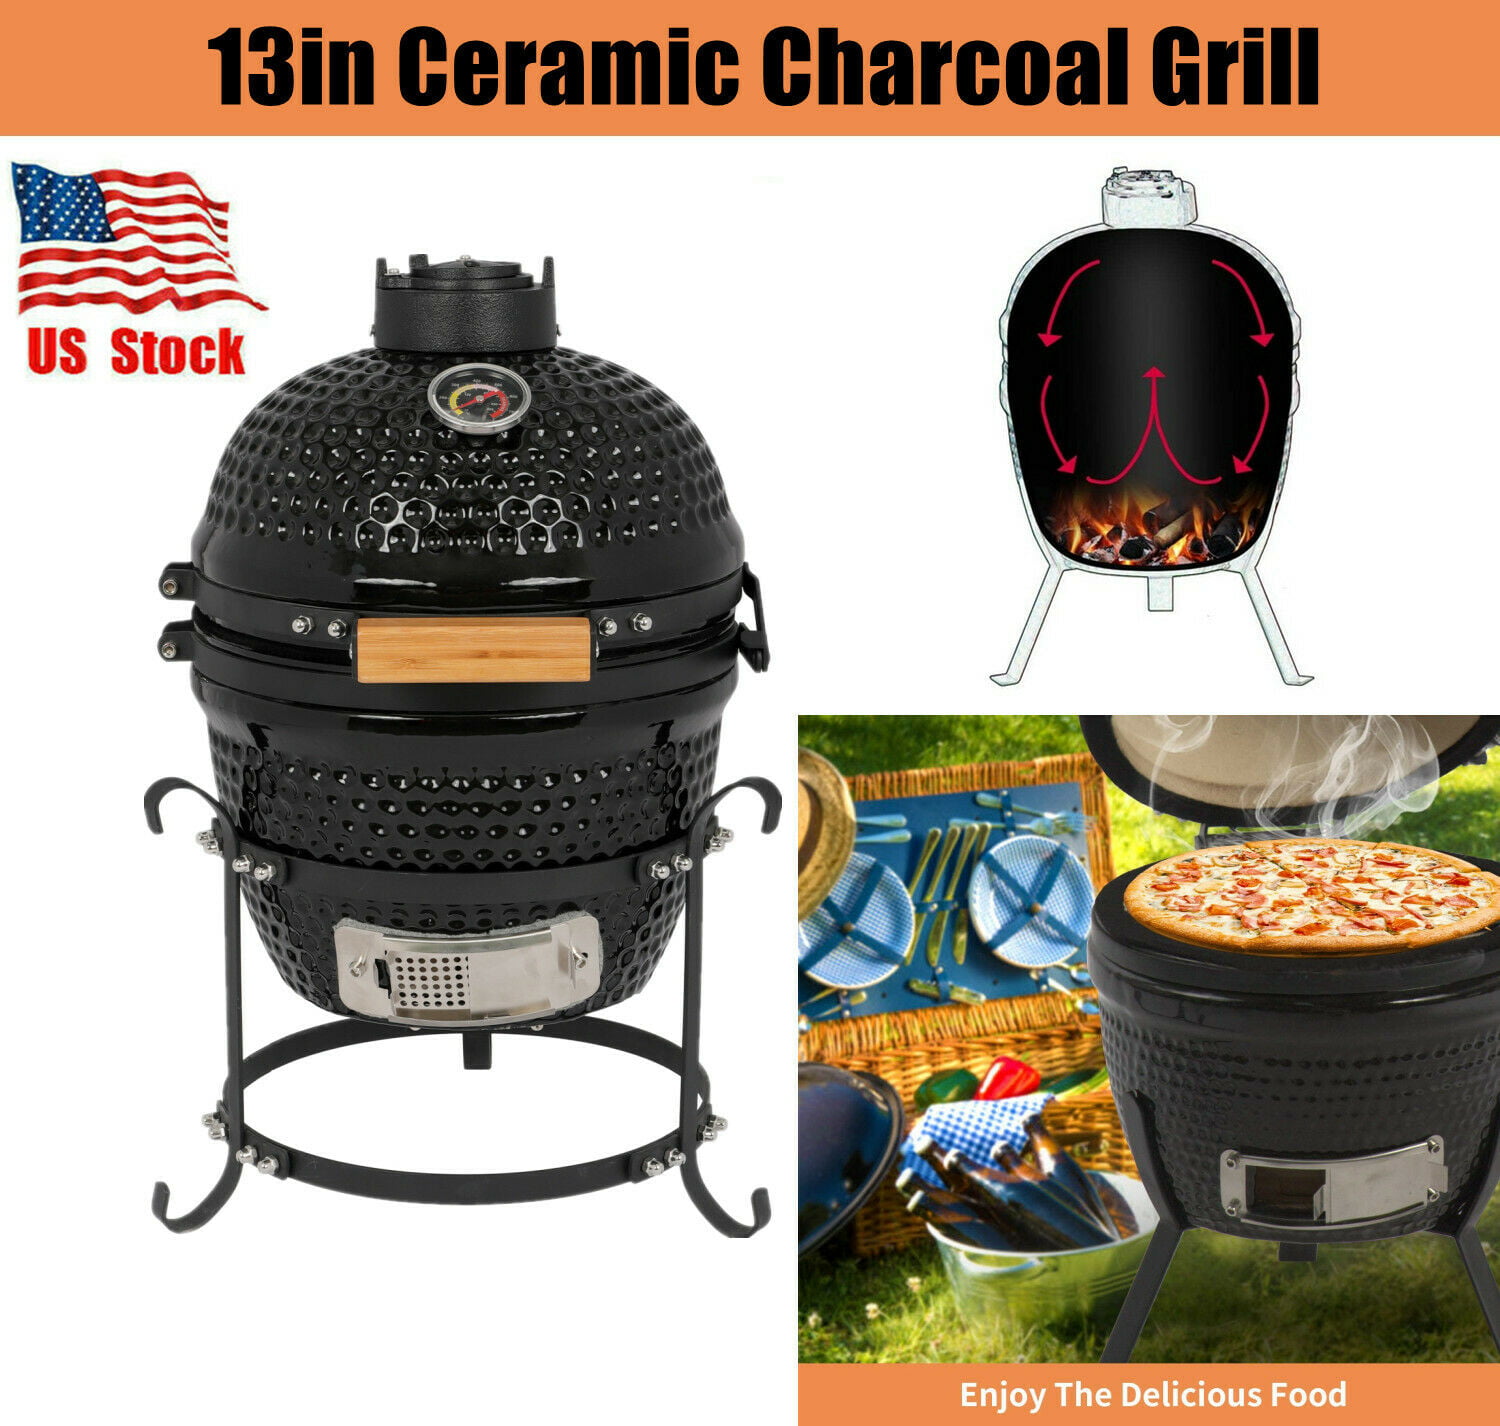 13 Inch Kamado Ceramic Charcoal Egg Grill, Multifunctional Outdoor Smoker Grill for BBQ, Camping and Picnic - Walmart.com